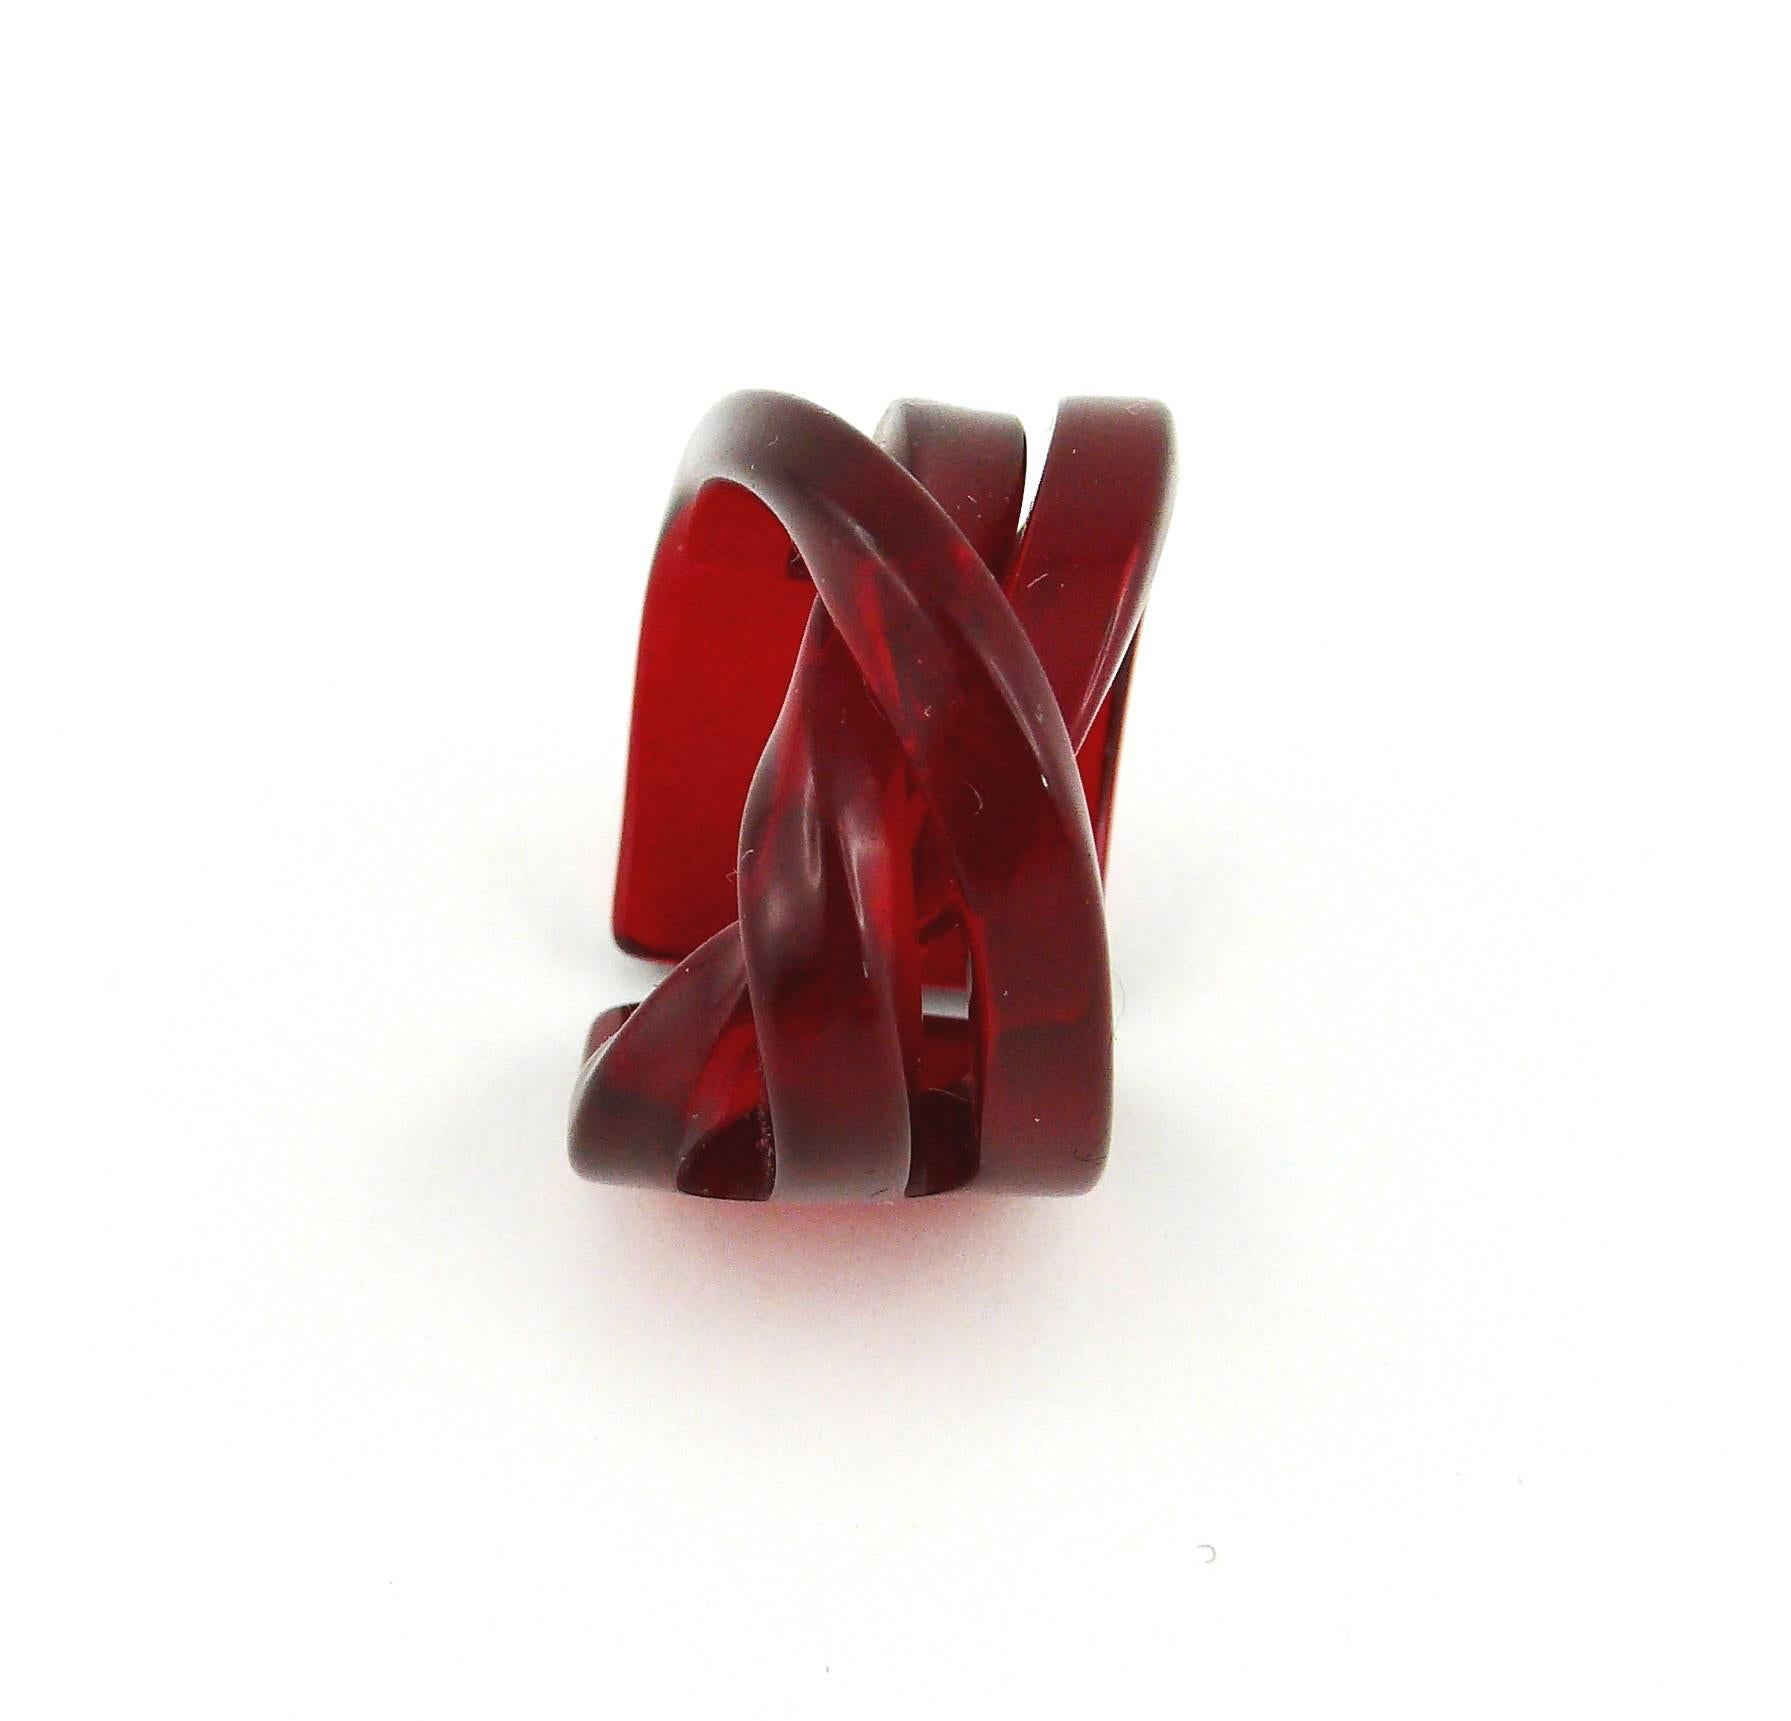 CHRISTIAN DIOR sculptural 3-D intertwined red lucite ring.

Embossed DIOR on one side.

Indicative measurements : inside circumference approx. 5.03 cm (1.98 inches) / width approx 1.4 cm (0.55 inch).

Comes with its original dust